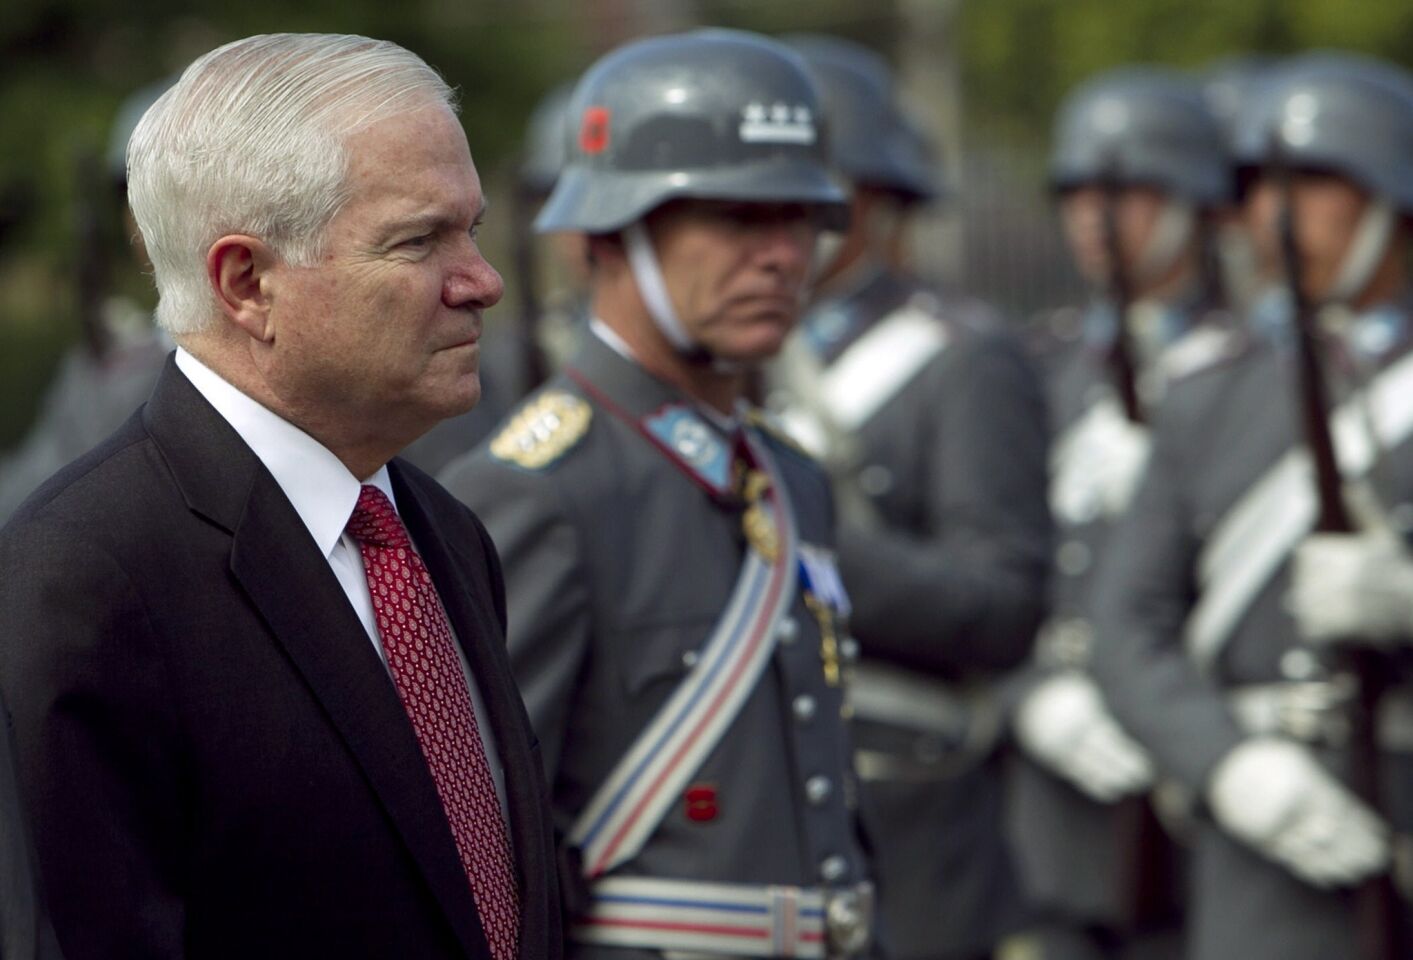 President Obama retained Robert Gates as his secretary of Defense after Gates had served under President George W. Bush since 2006. Gates stepped down in 2011. An architect of the troop surge strategy in the Iraq War, Gates later oversaw the beginning of the Obama-era withdraw from the country. A Presidential Medal of Freedom recipient, Gates is now the 24th Chancellor of The College of William and Mary and serves on the Starbucks board of directors.